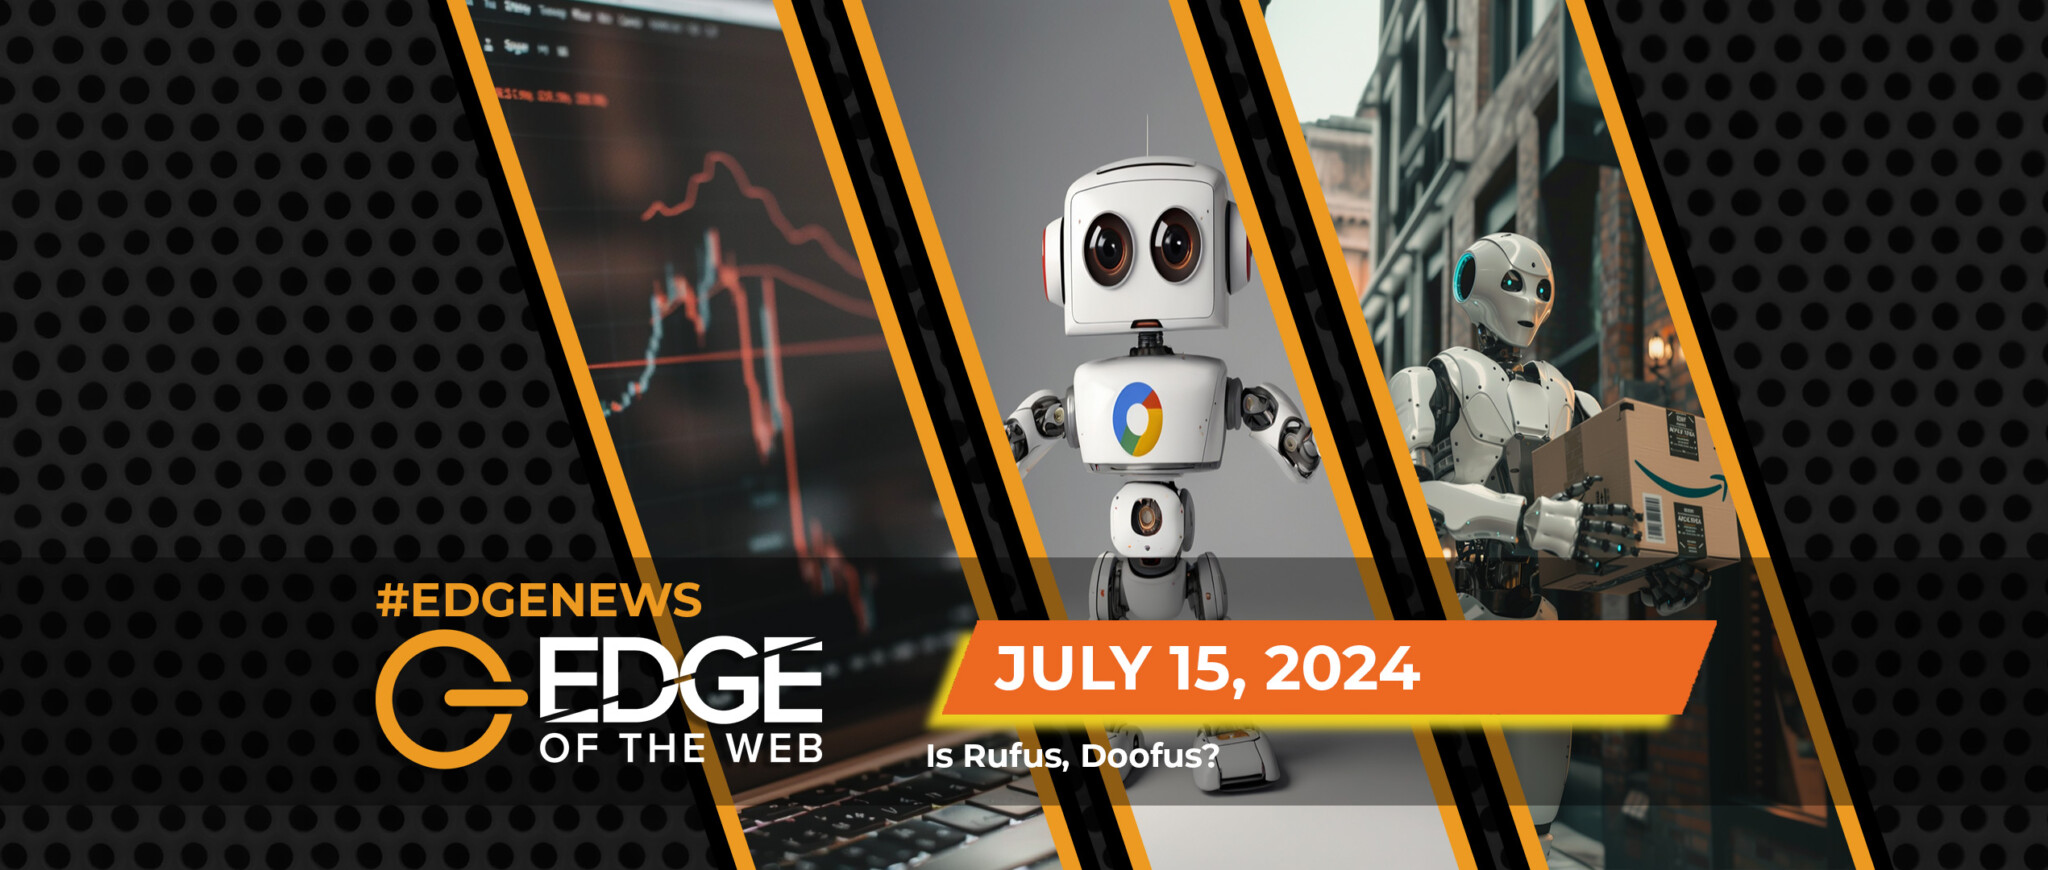 Episode 698: News from the EDGE, Week of July 15, 2024